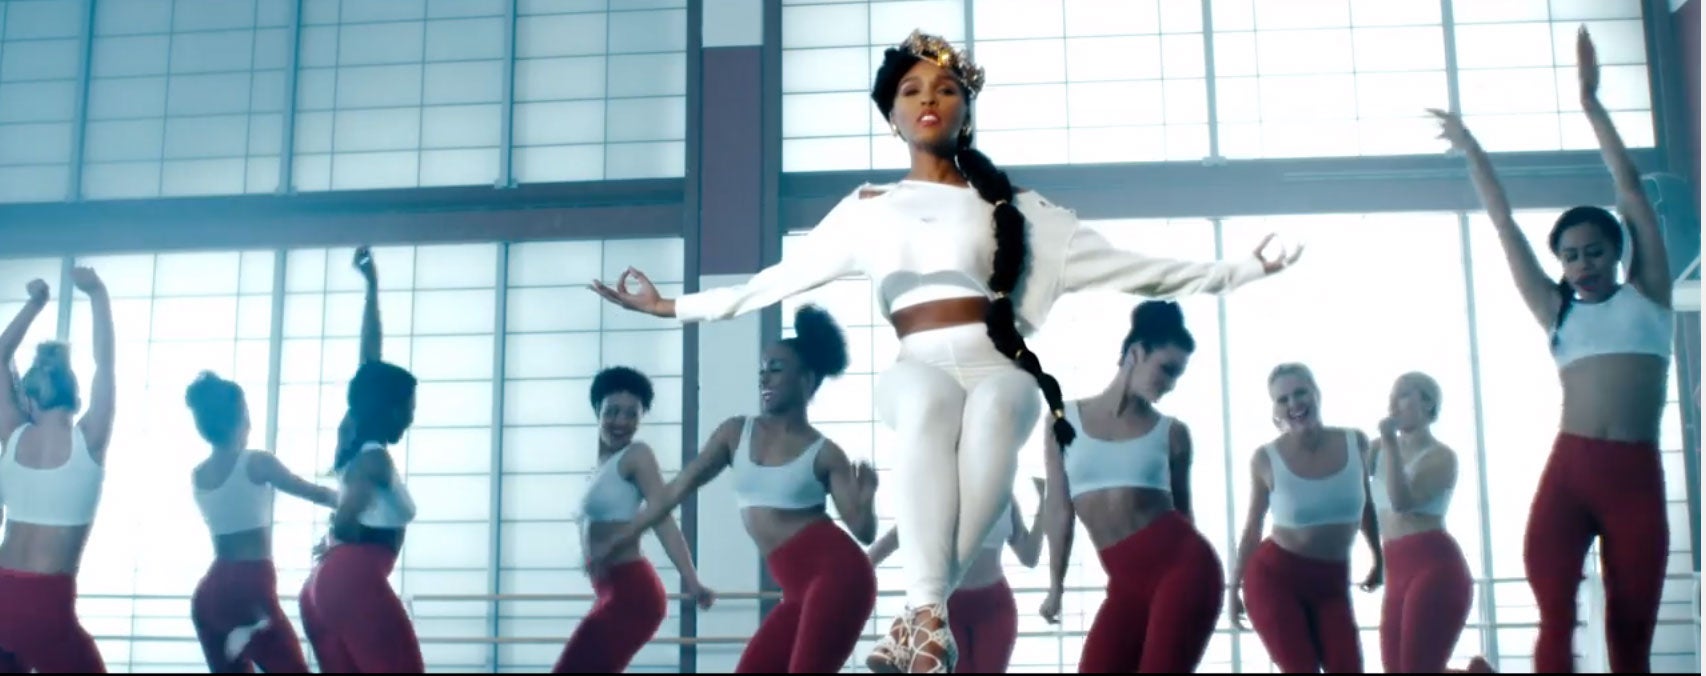 Janelle Monae's New Video "Yoga" Will Make You Want To Work Out!